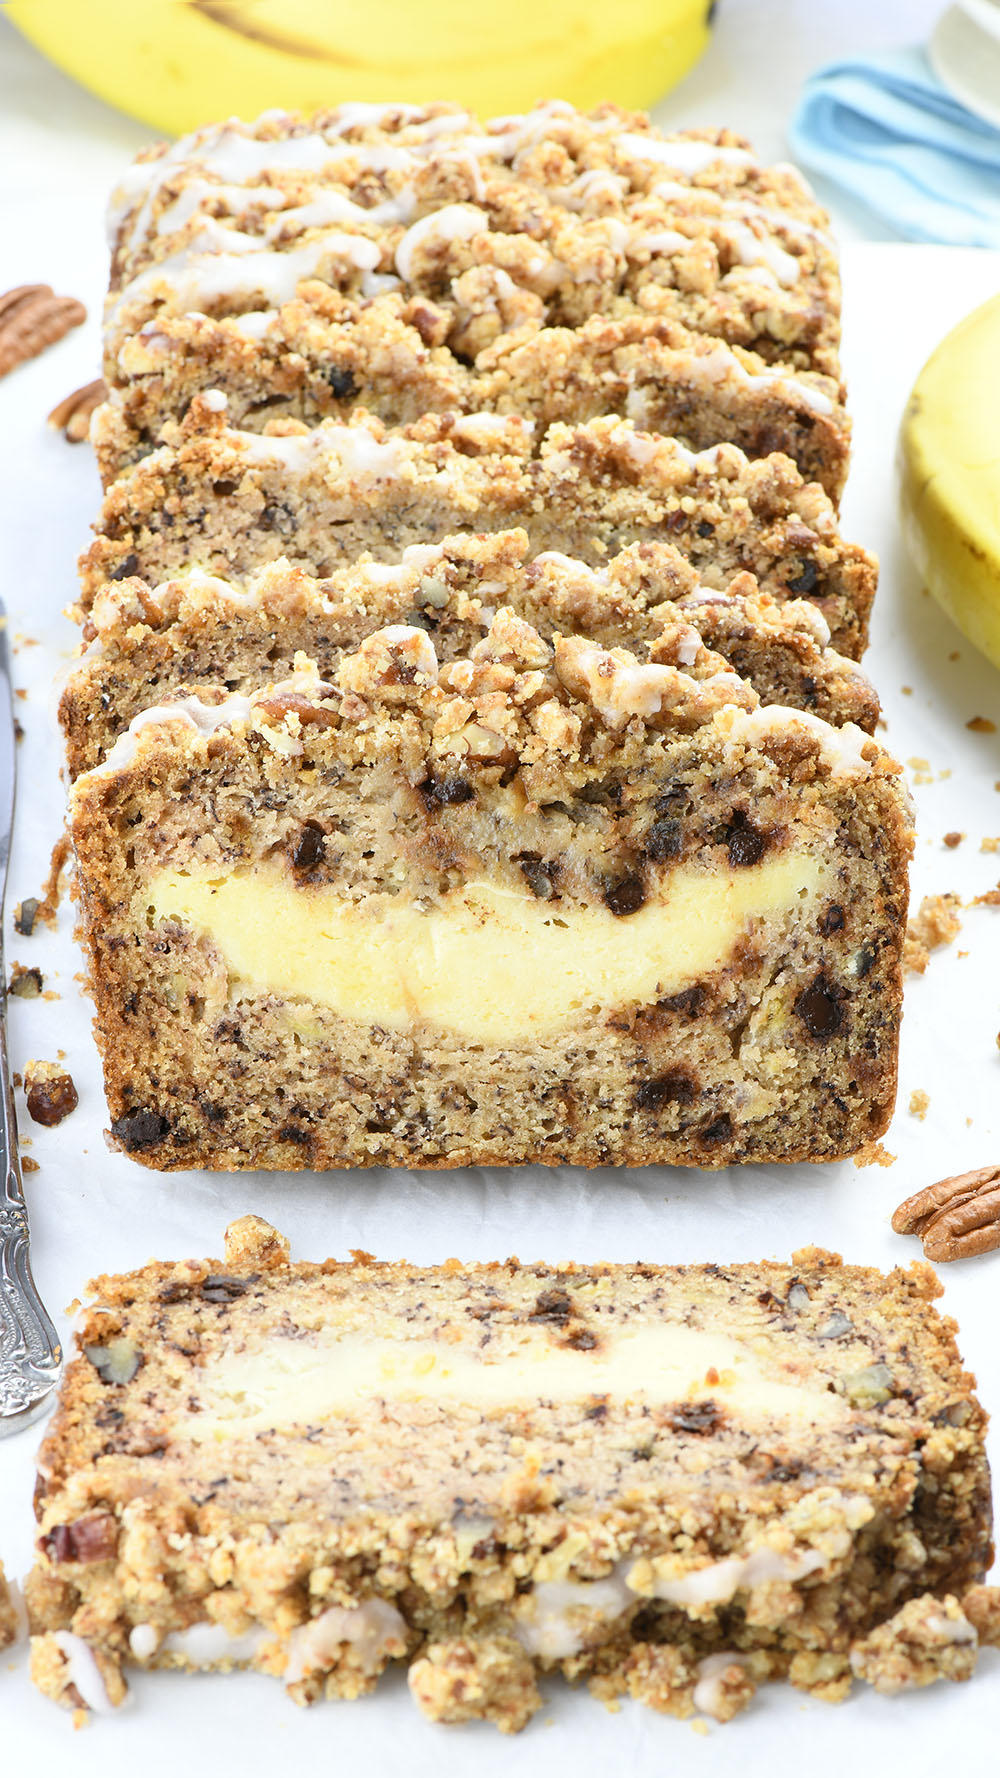 This banana bread stuffed with cream cheese filling - slices on white paper.